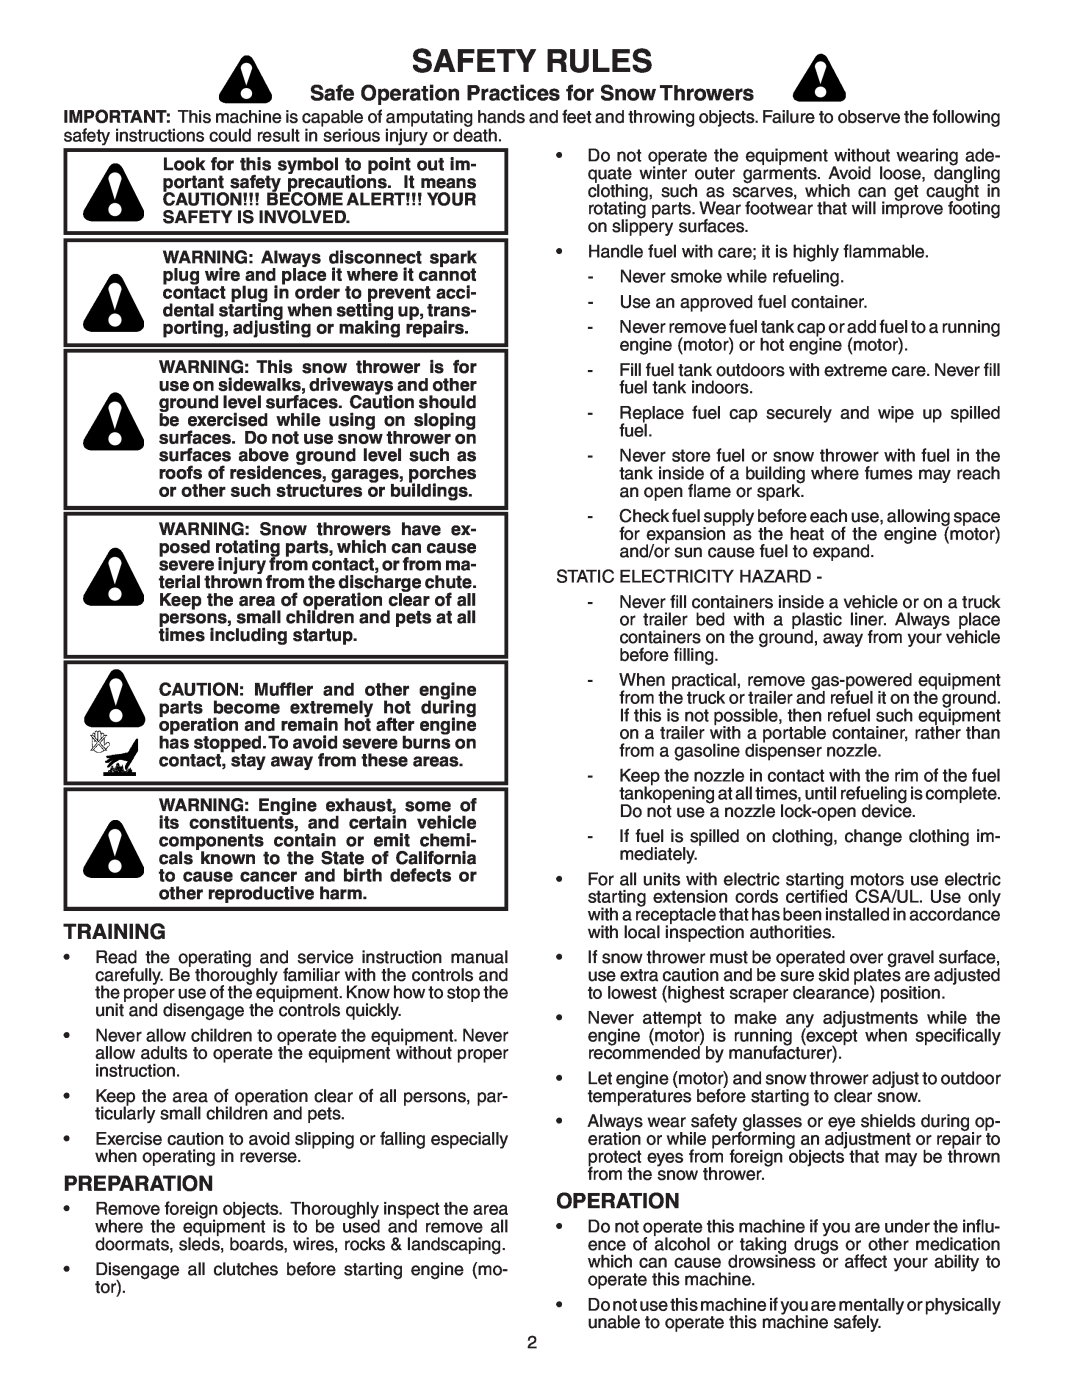 Poulan PP5524ESB owner manual Safety Rules, Safe Operation Practices for Snow Throwers, Training, Preparation 